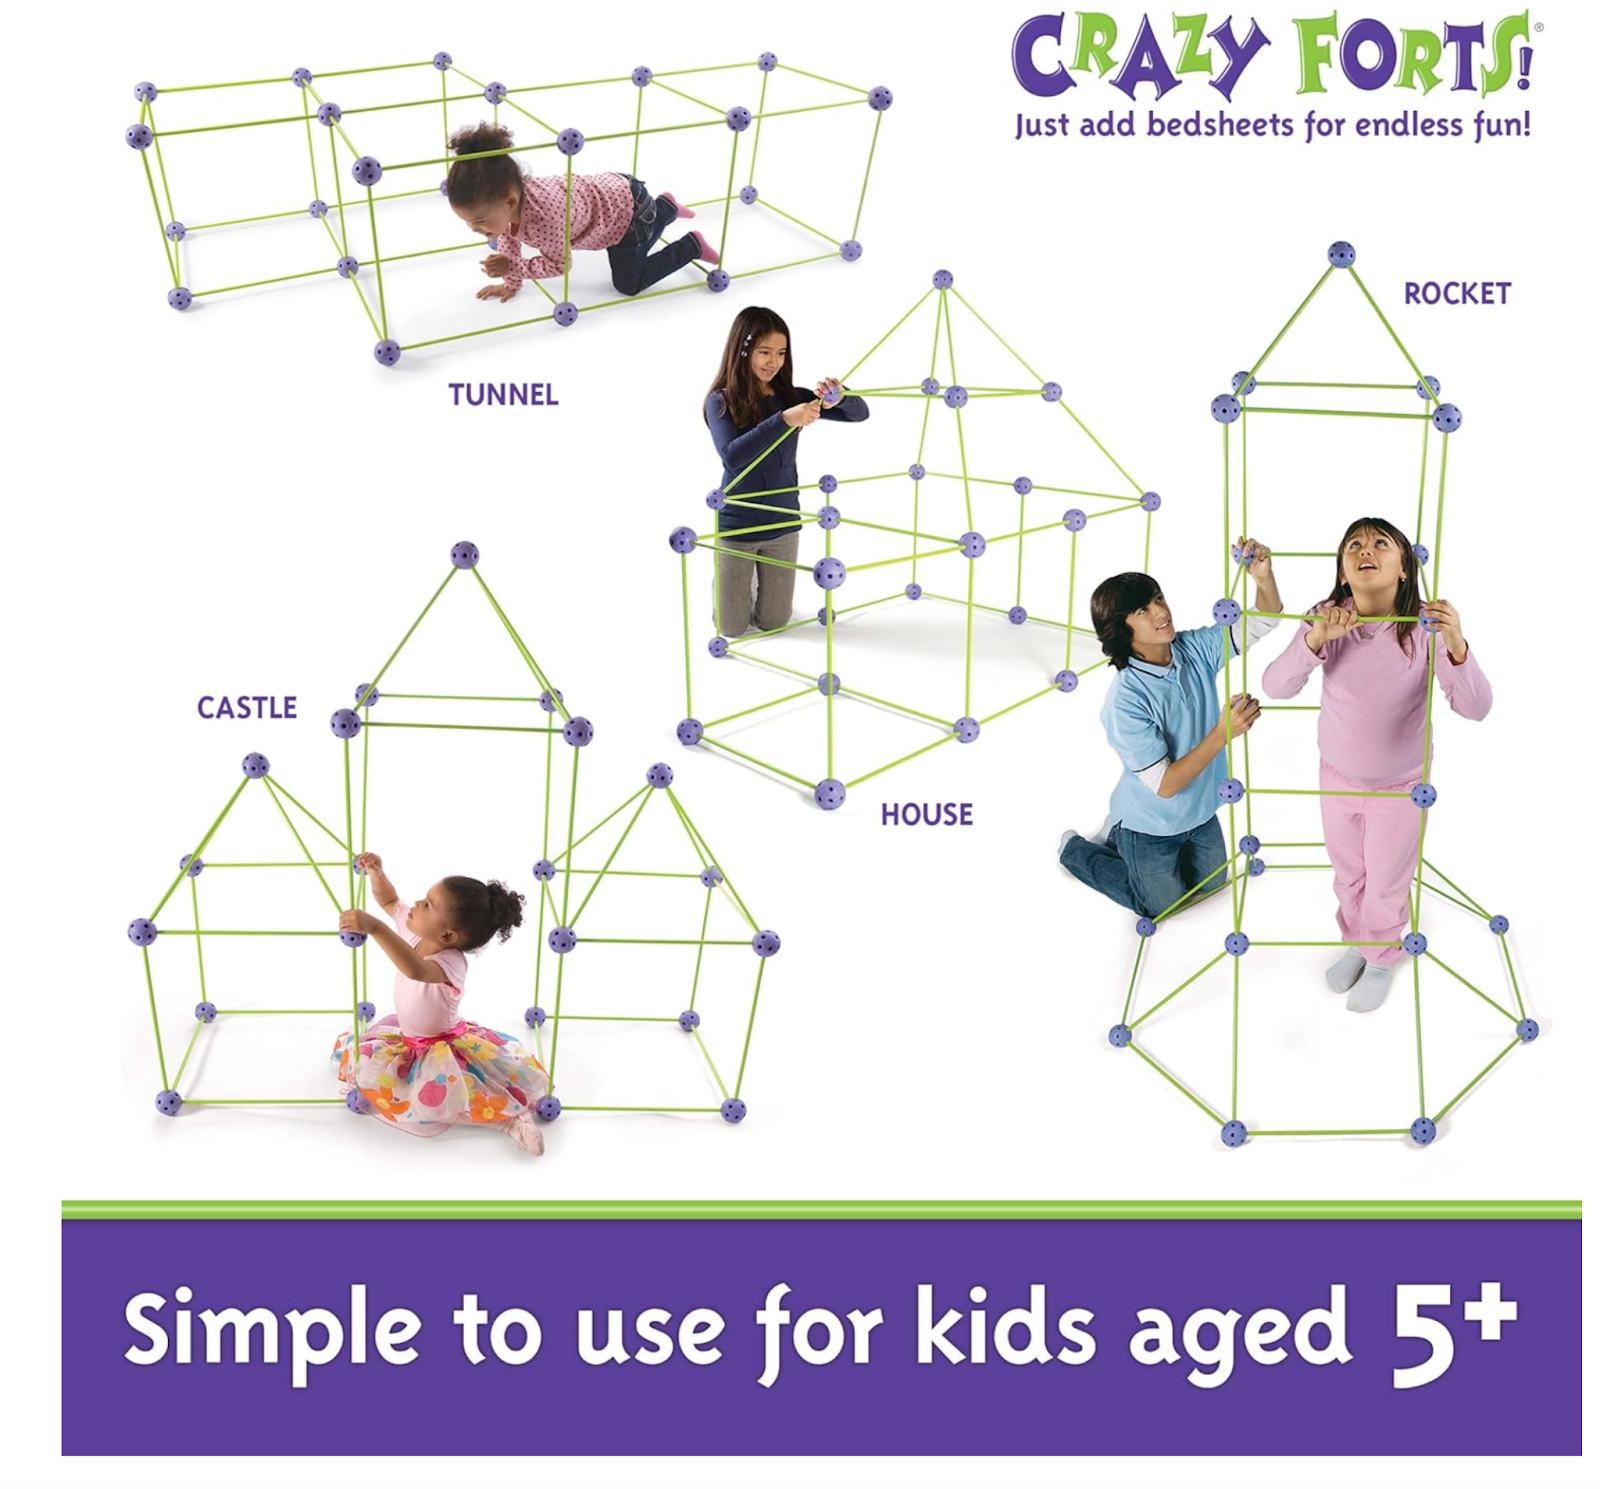 Fuel your child's imagination with the Crazy Forts Kit. This building set allows kids to create their own secret hideaways, forts, and play spaces. With easy-to-connect rods and balls, the possibilities are endless. Watch as their creativity takes shape in the form of fantastical forts.